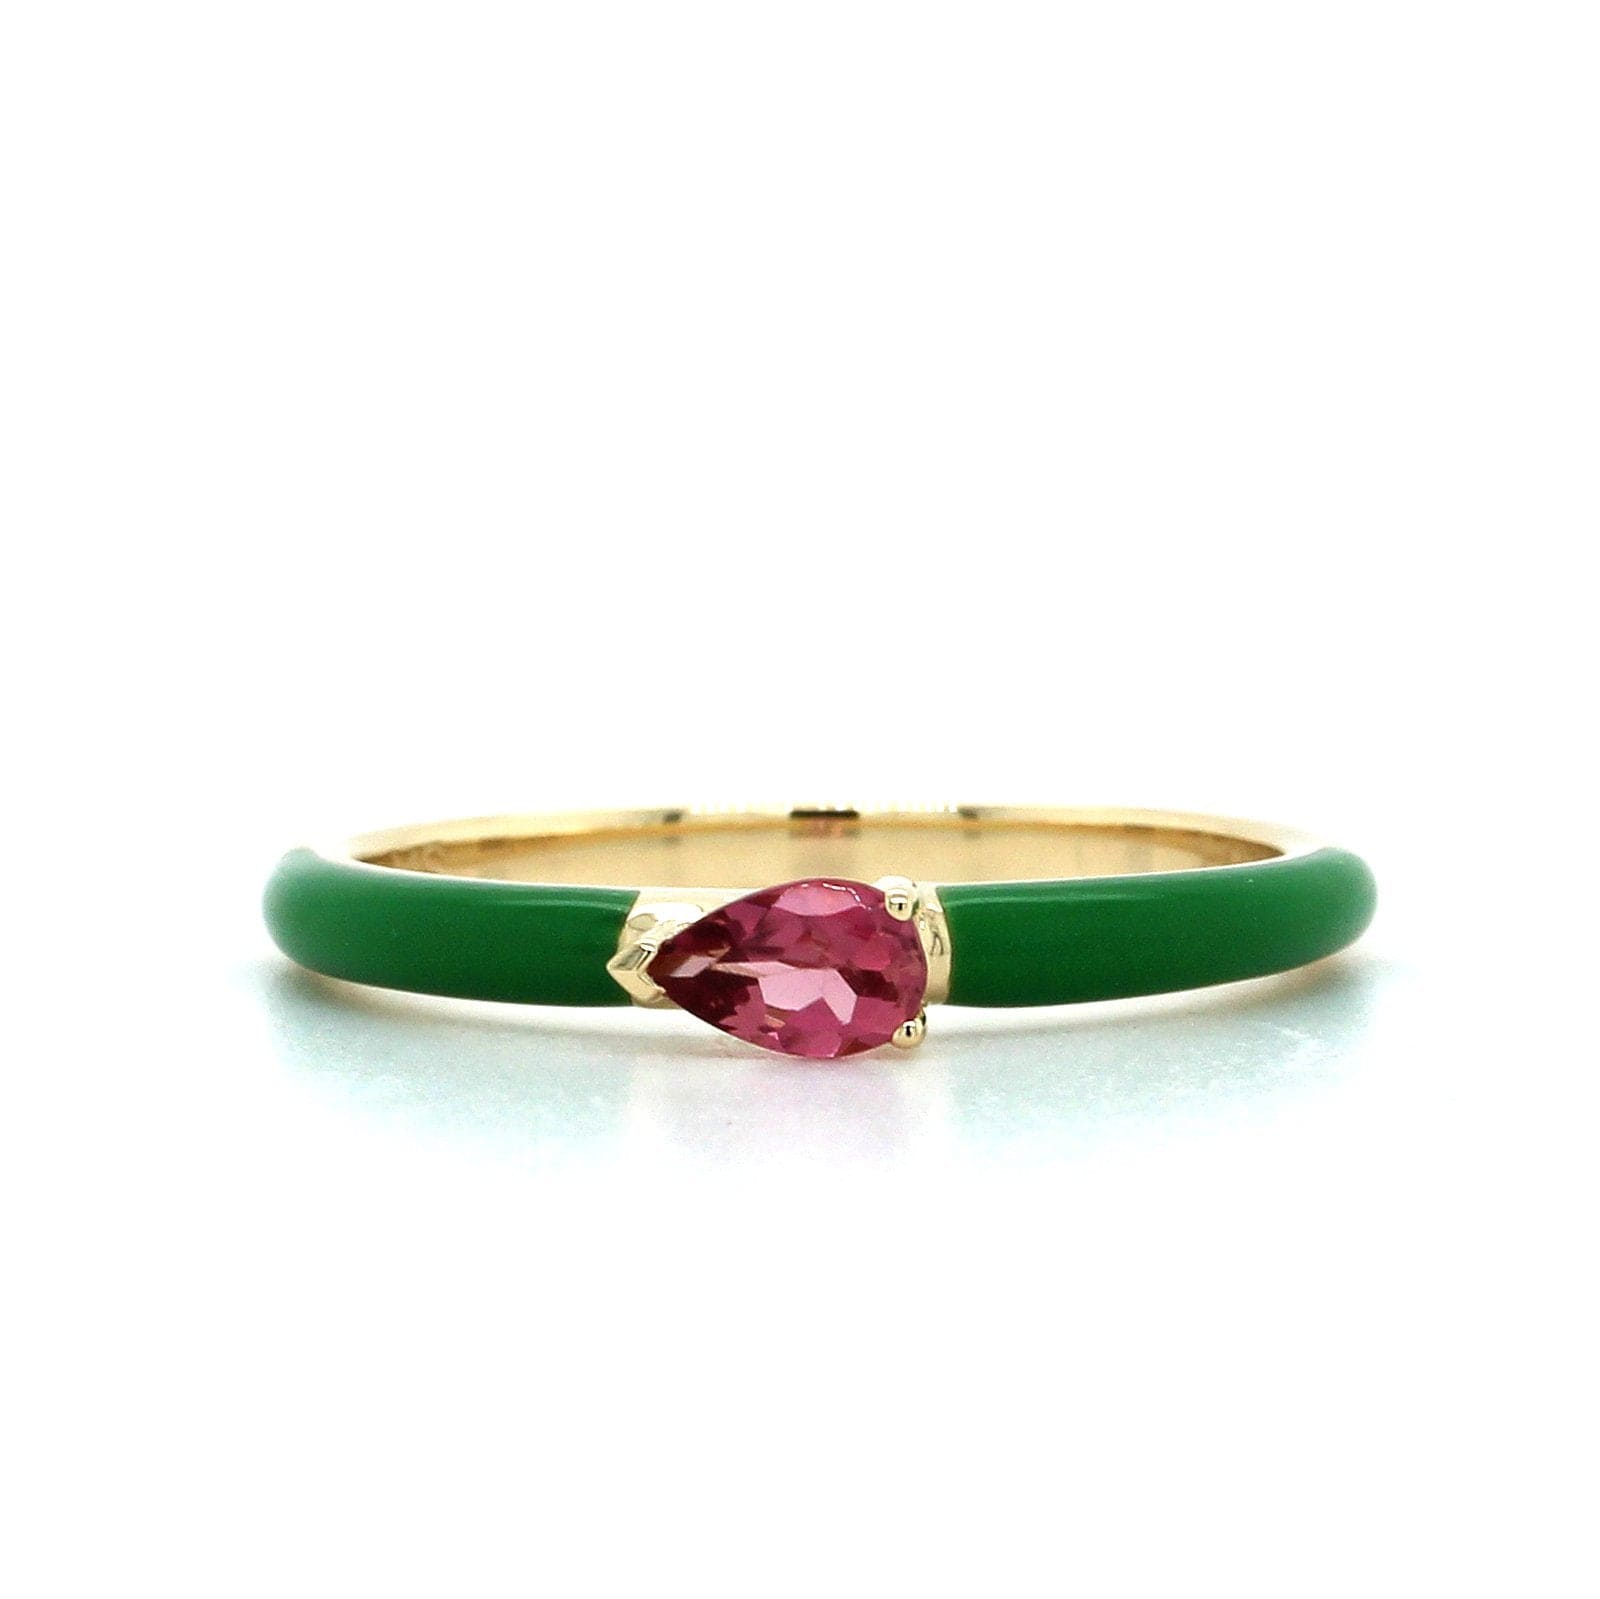 The Quinn 14K Yellow Gold Pink Tourmaline with Olive Enamel Ring, 14K Yellow Gold, Long's Jewelers